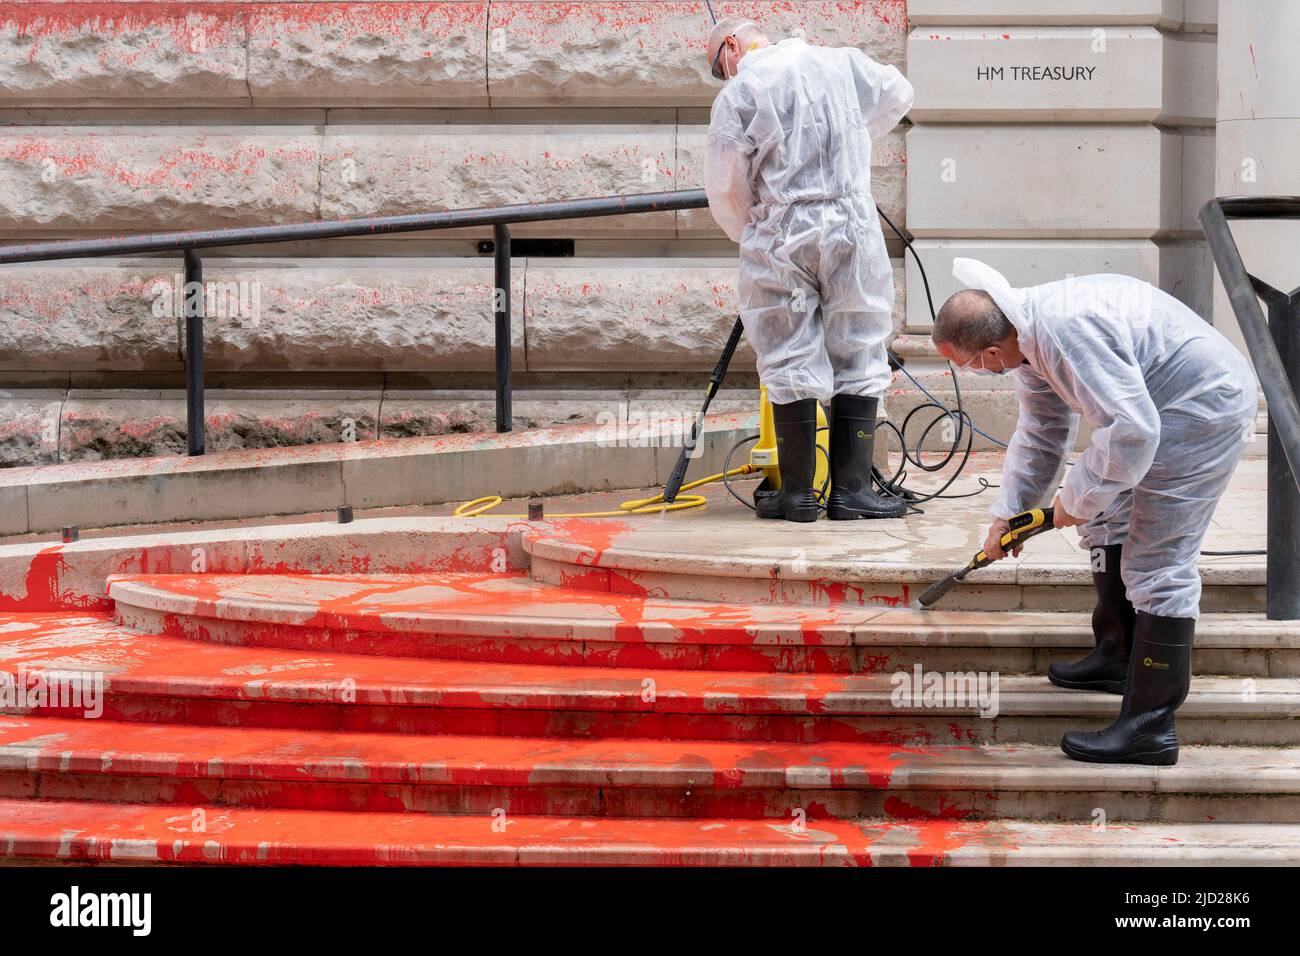 The aftermath of a red paint protest by climate change activists with 'Just Stop Oil' who sprayed the exterior wall and steps of the Treasury in Horse Guards, on 13th June 2022, in London, England. 'Just Stop Oil' took direct action for a UK government policy encouraging oil & gas expansion, they say. Stock Photo